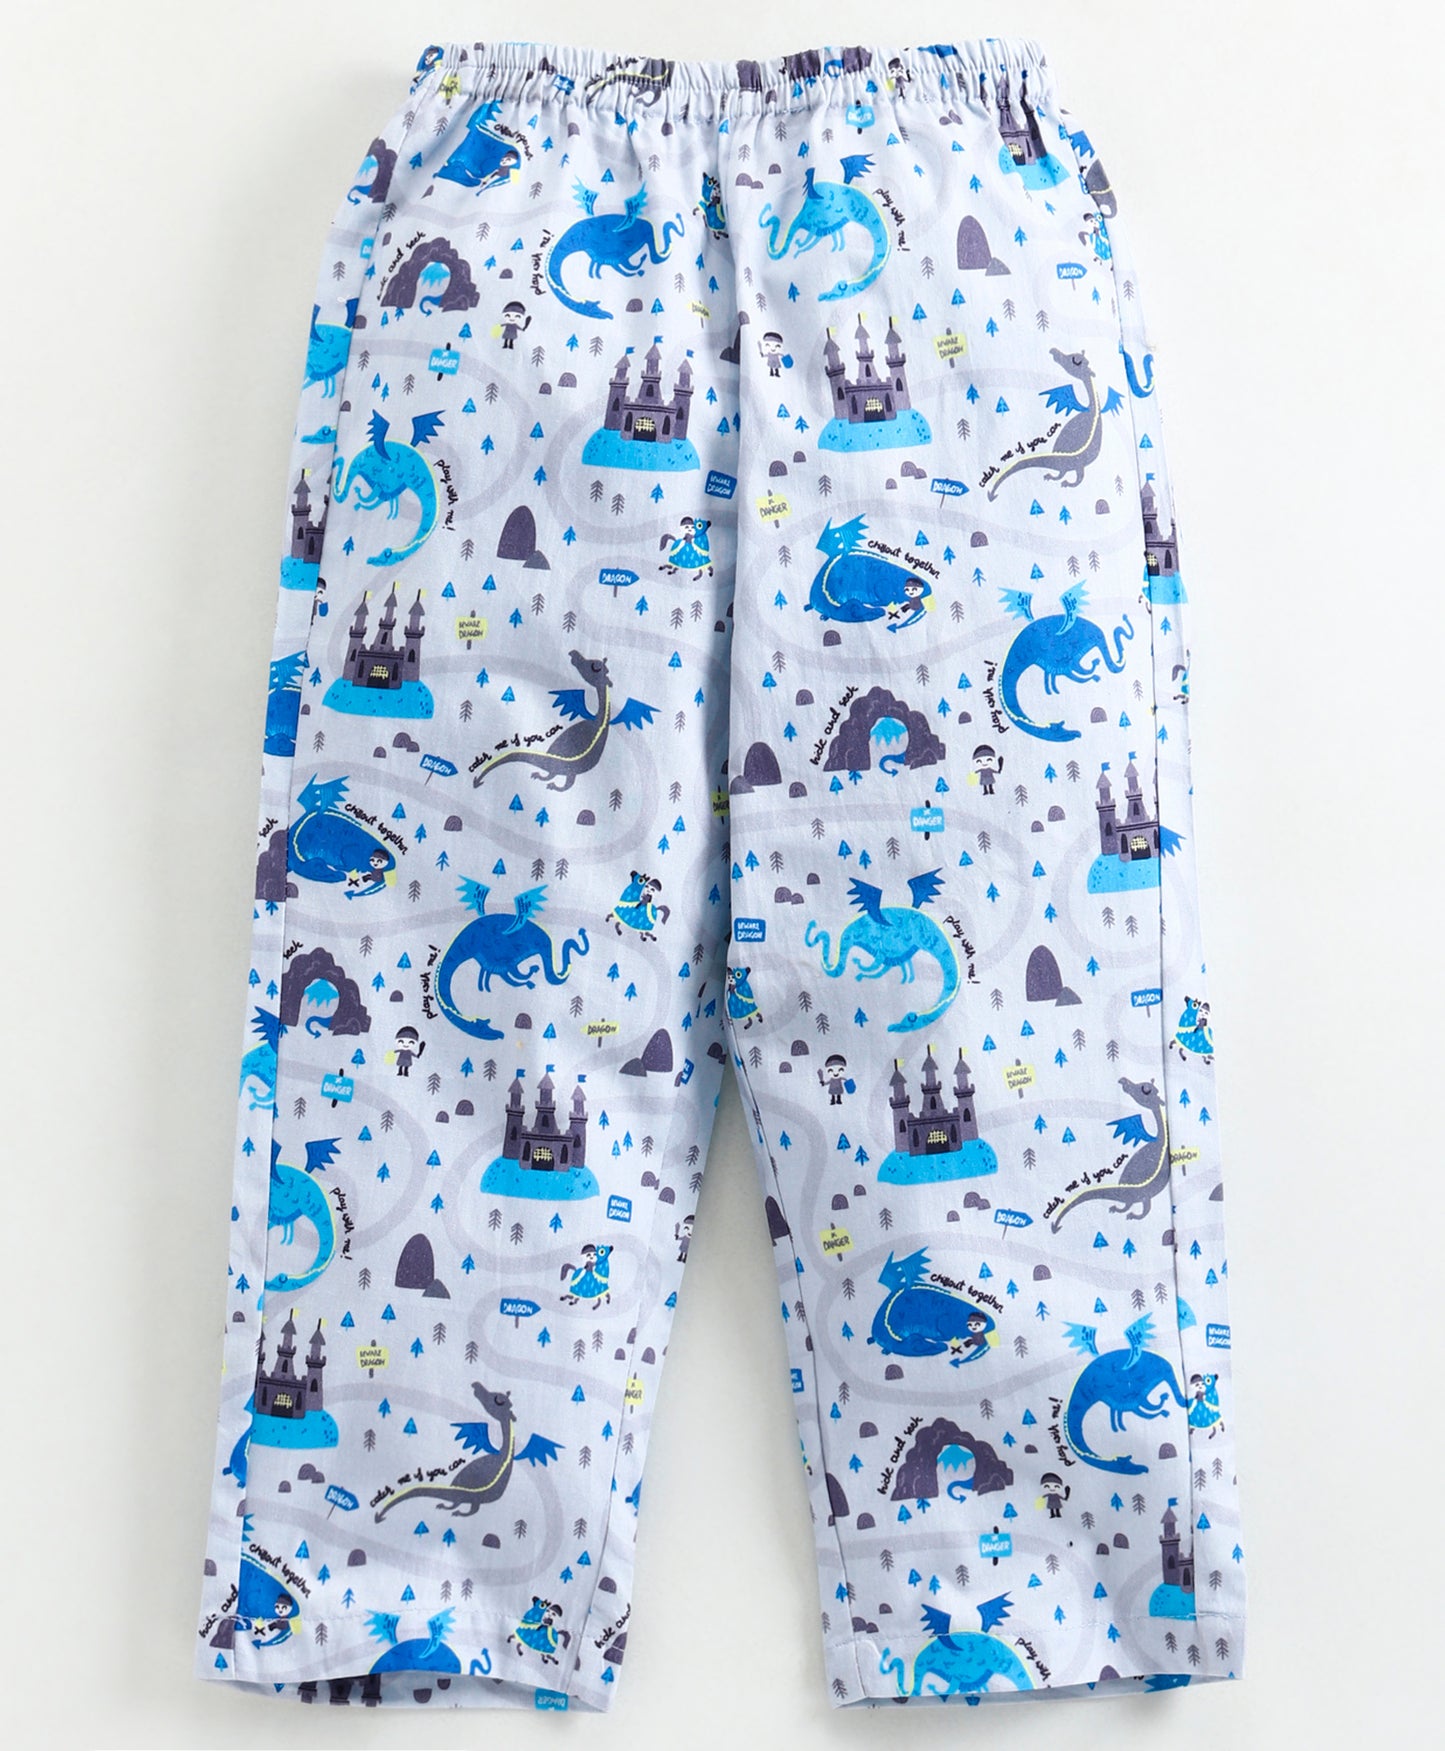 DRAGON AND CASTLE PRINT NIGHTSUIT